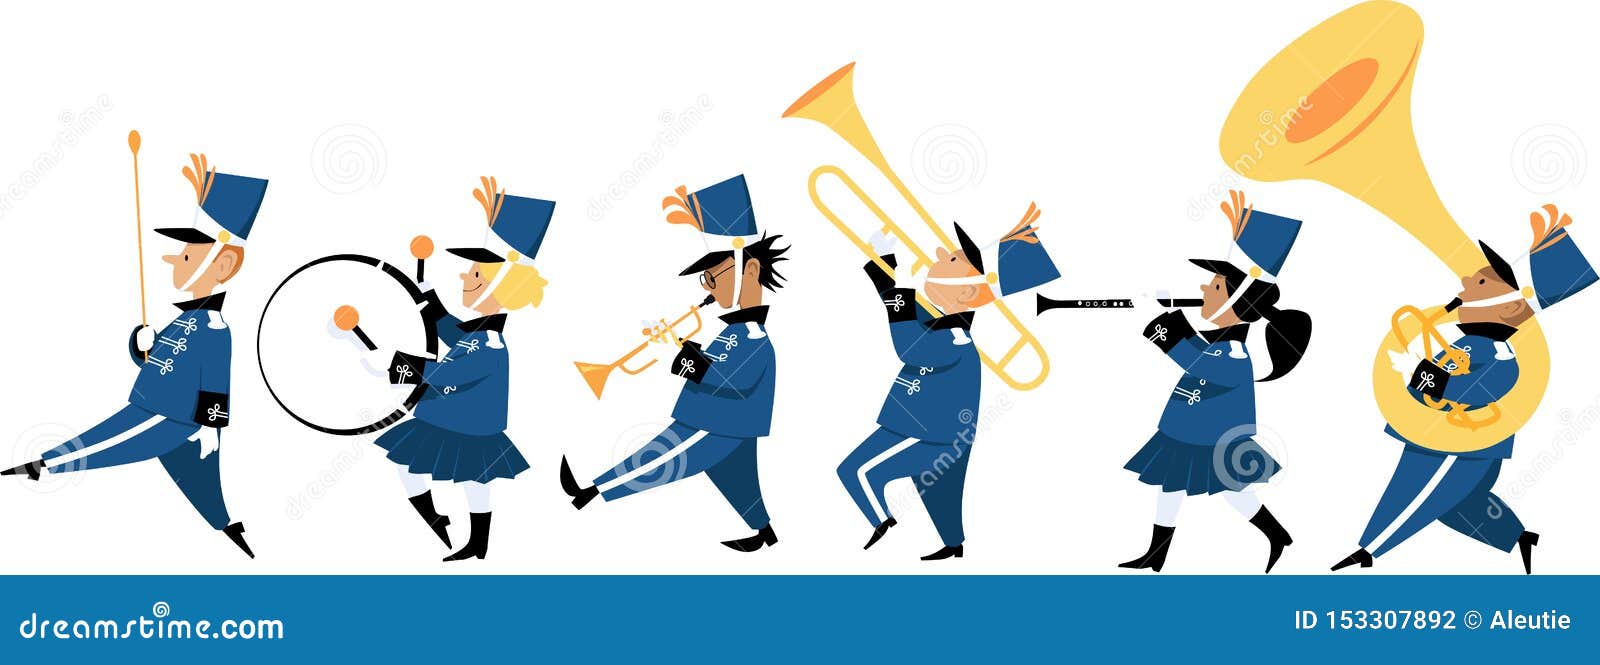 children marching band